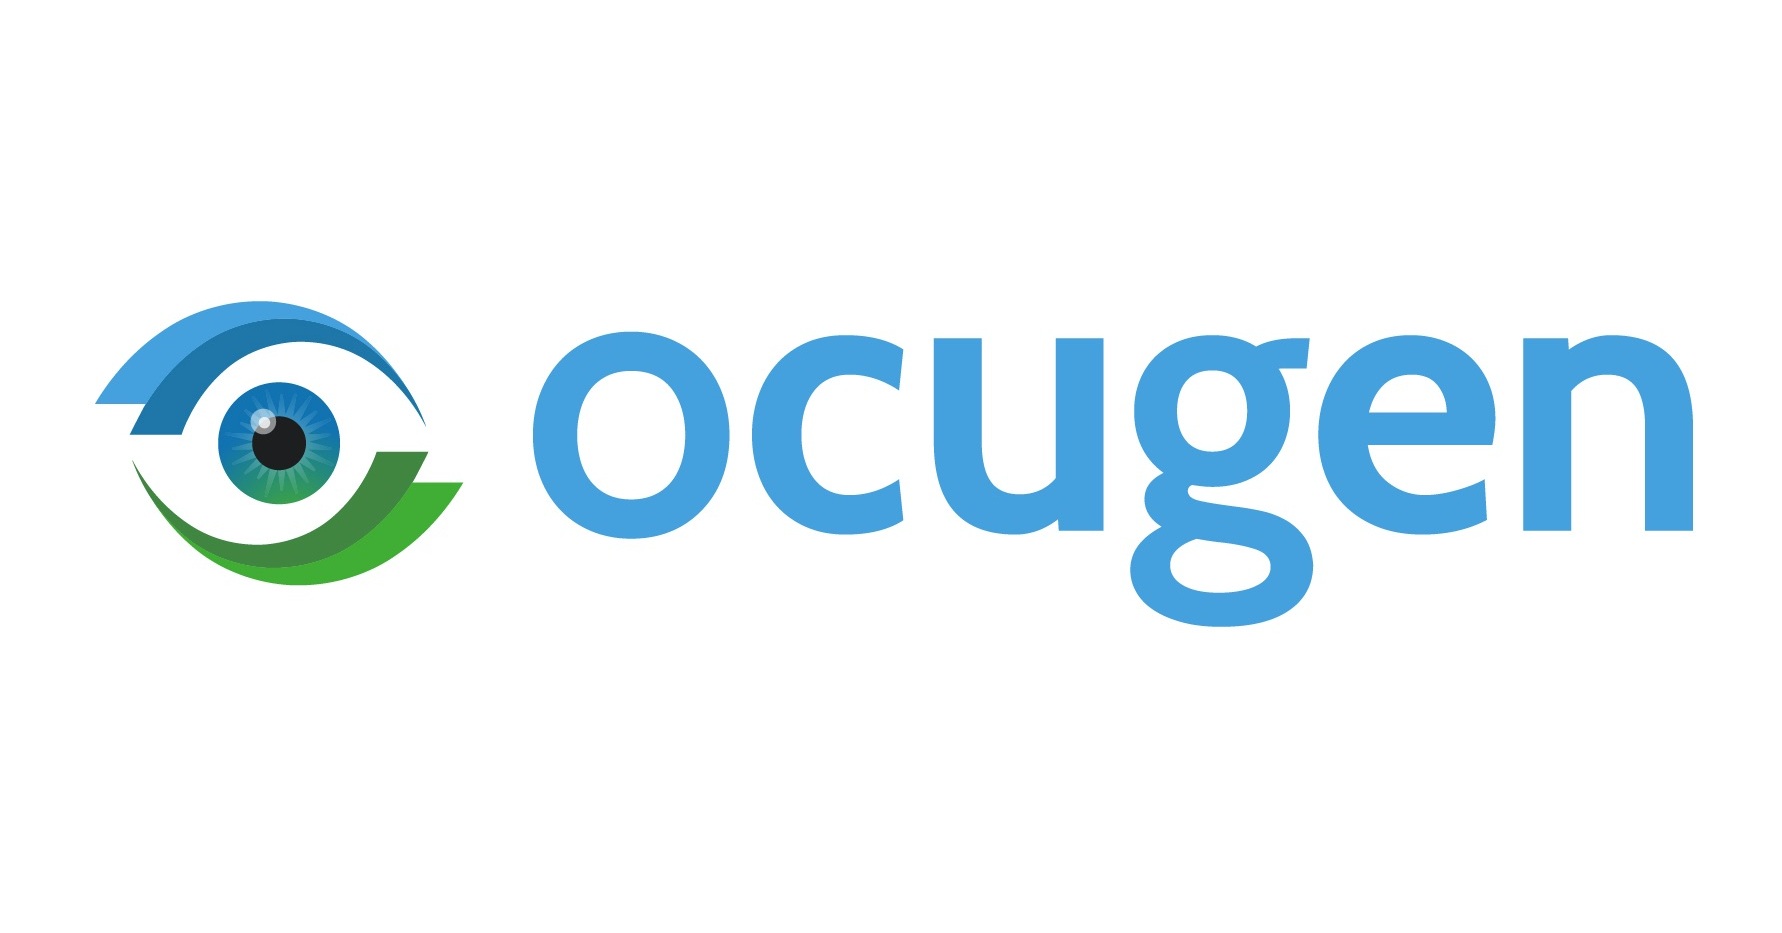 OCGN Stock: Why Ocugen Shares Are Rocketing Higher Again Today